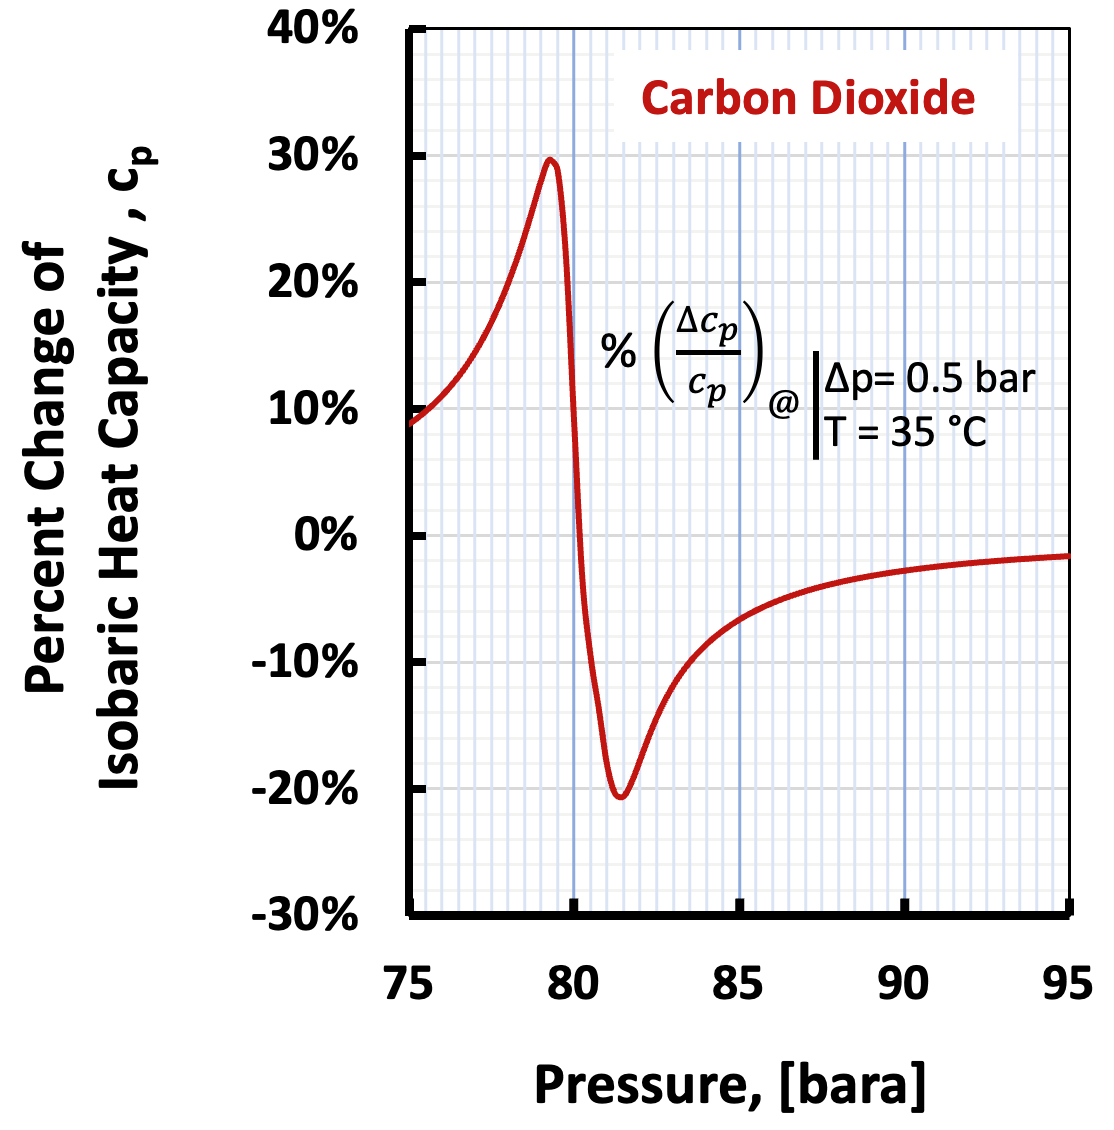  Figure 1: Phase diagram of carbon dioxide above and in the vicinity of the critical point showing the dense fluid, liquid-gas-like supercritical and the transitional (Widom) region. Figure 2: Sensitivity of isobaric heat capacity, cp is examined for 0.5 bar change of pressure at a constant temperature of 35 °C across a range of pressures above the critical point of pure CO2 [3]. Figure 3: Three possible transcritical CO2 compression pathways from 1 bara to 150 bara.[3] Credit: Matt Taher, P.E.